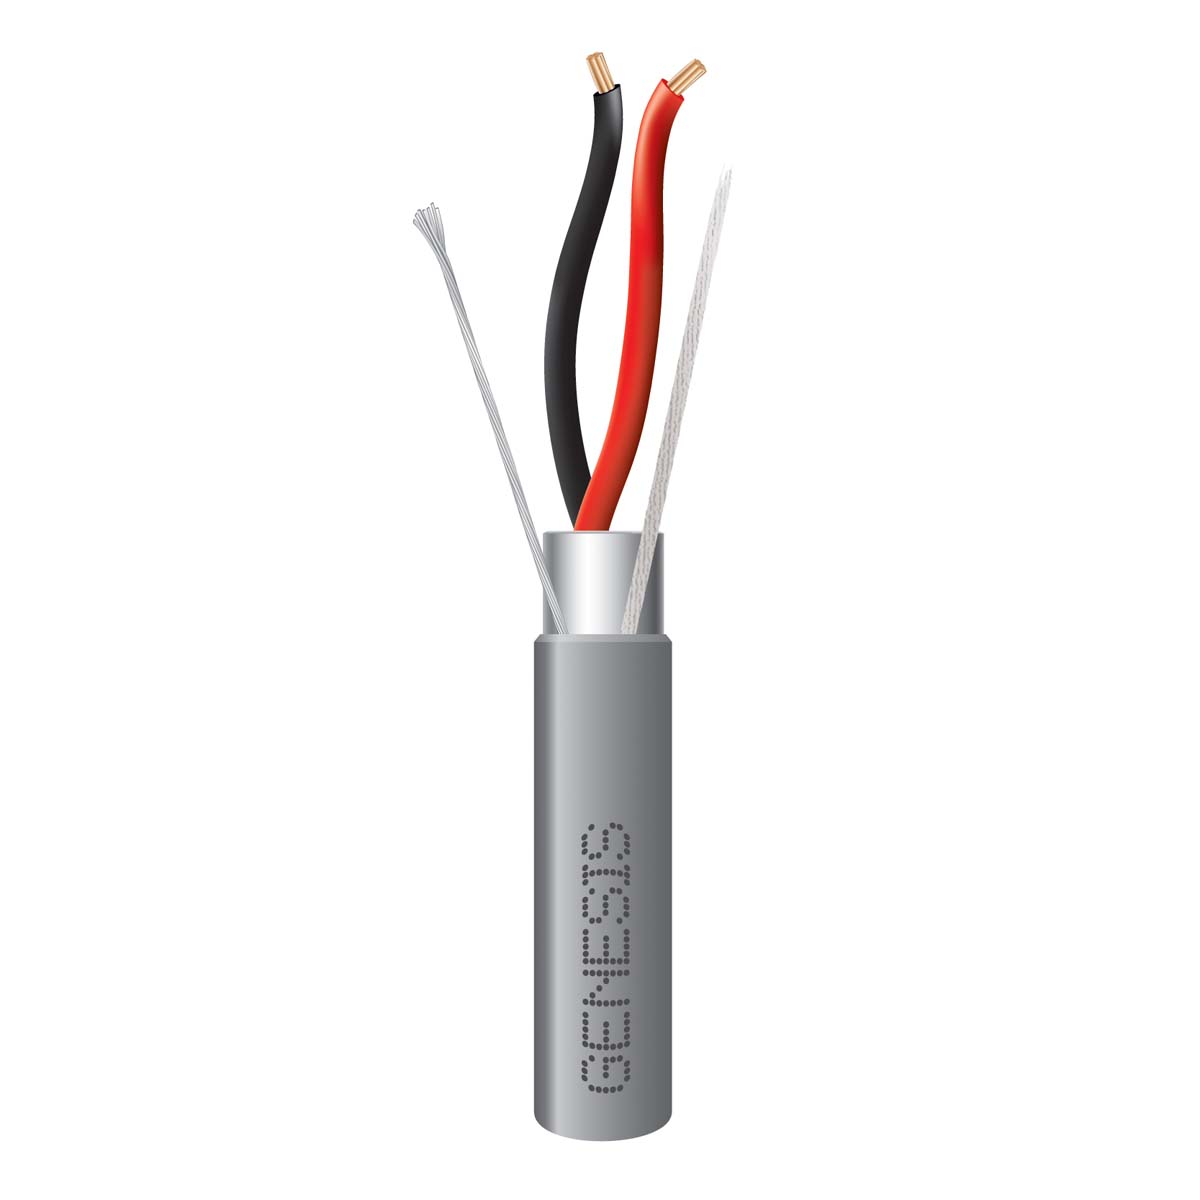 GENESIS CABLE | Cable 18/2 STR
OAS CMR 1000&#39; PB Gray Riser
Rated